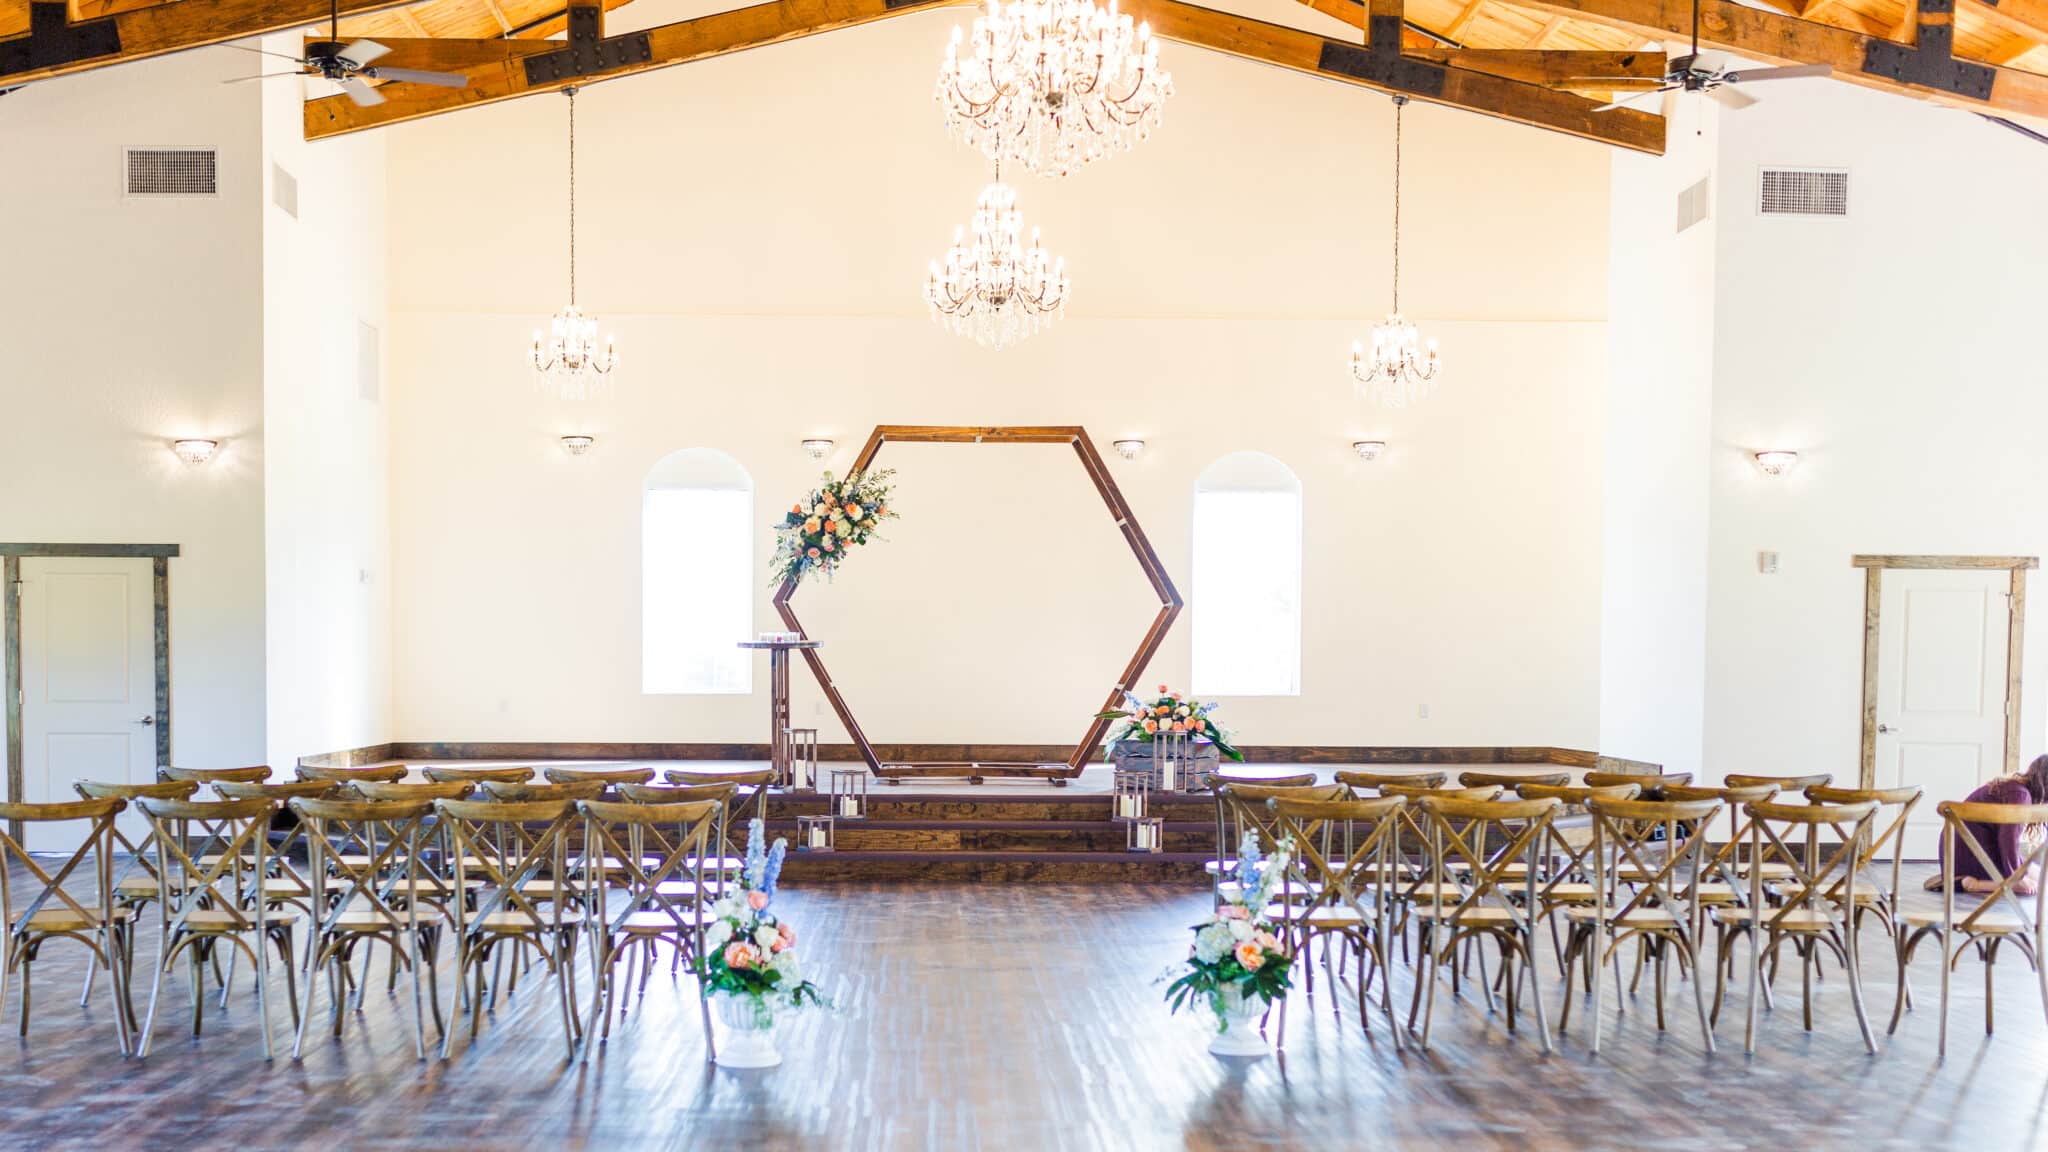 wedding ceremony with cross back chairs setup and wooden hexagon arch inside venue with wooden frame